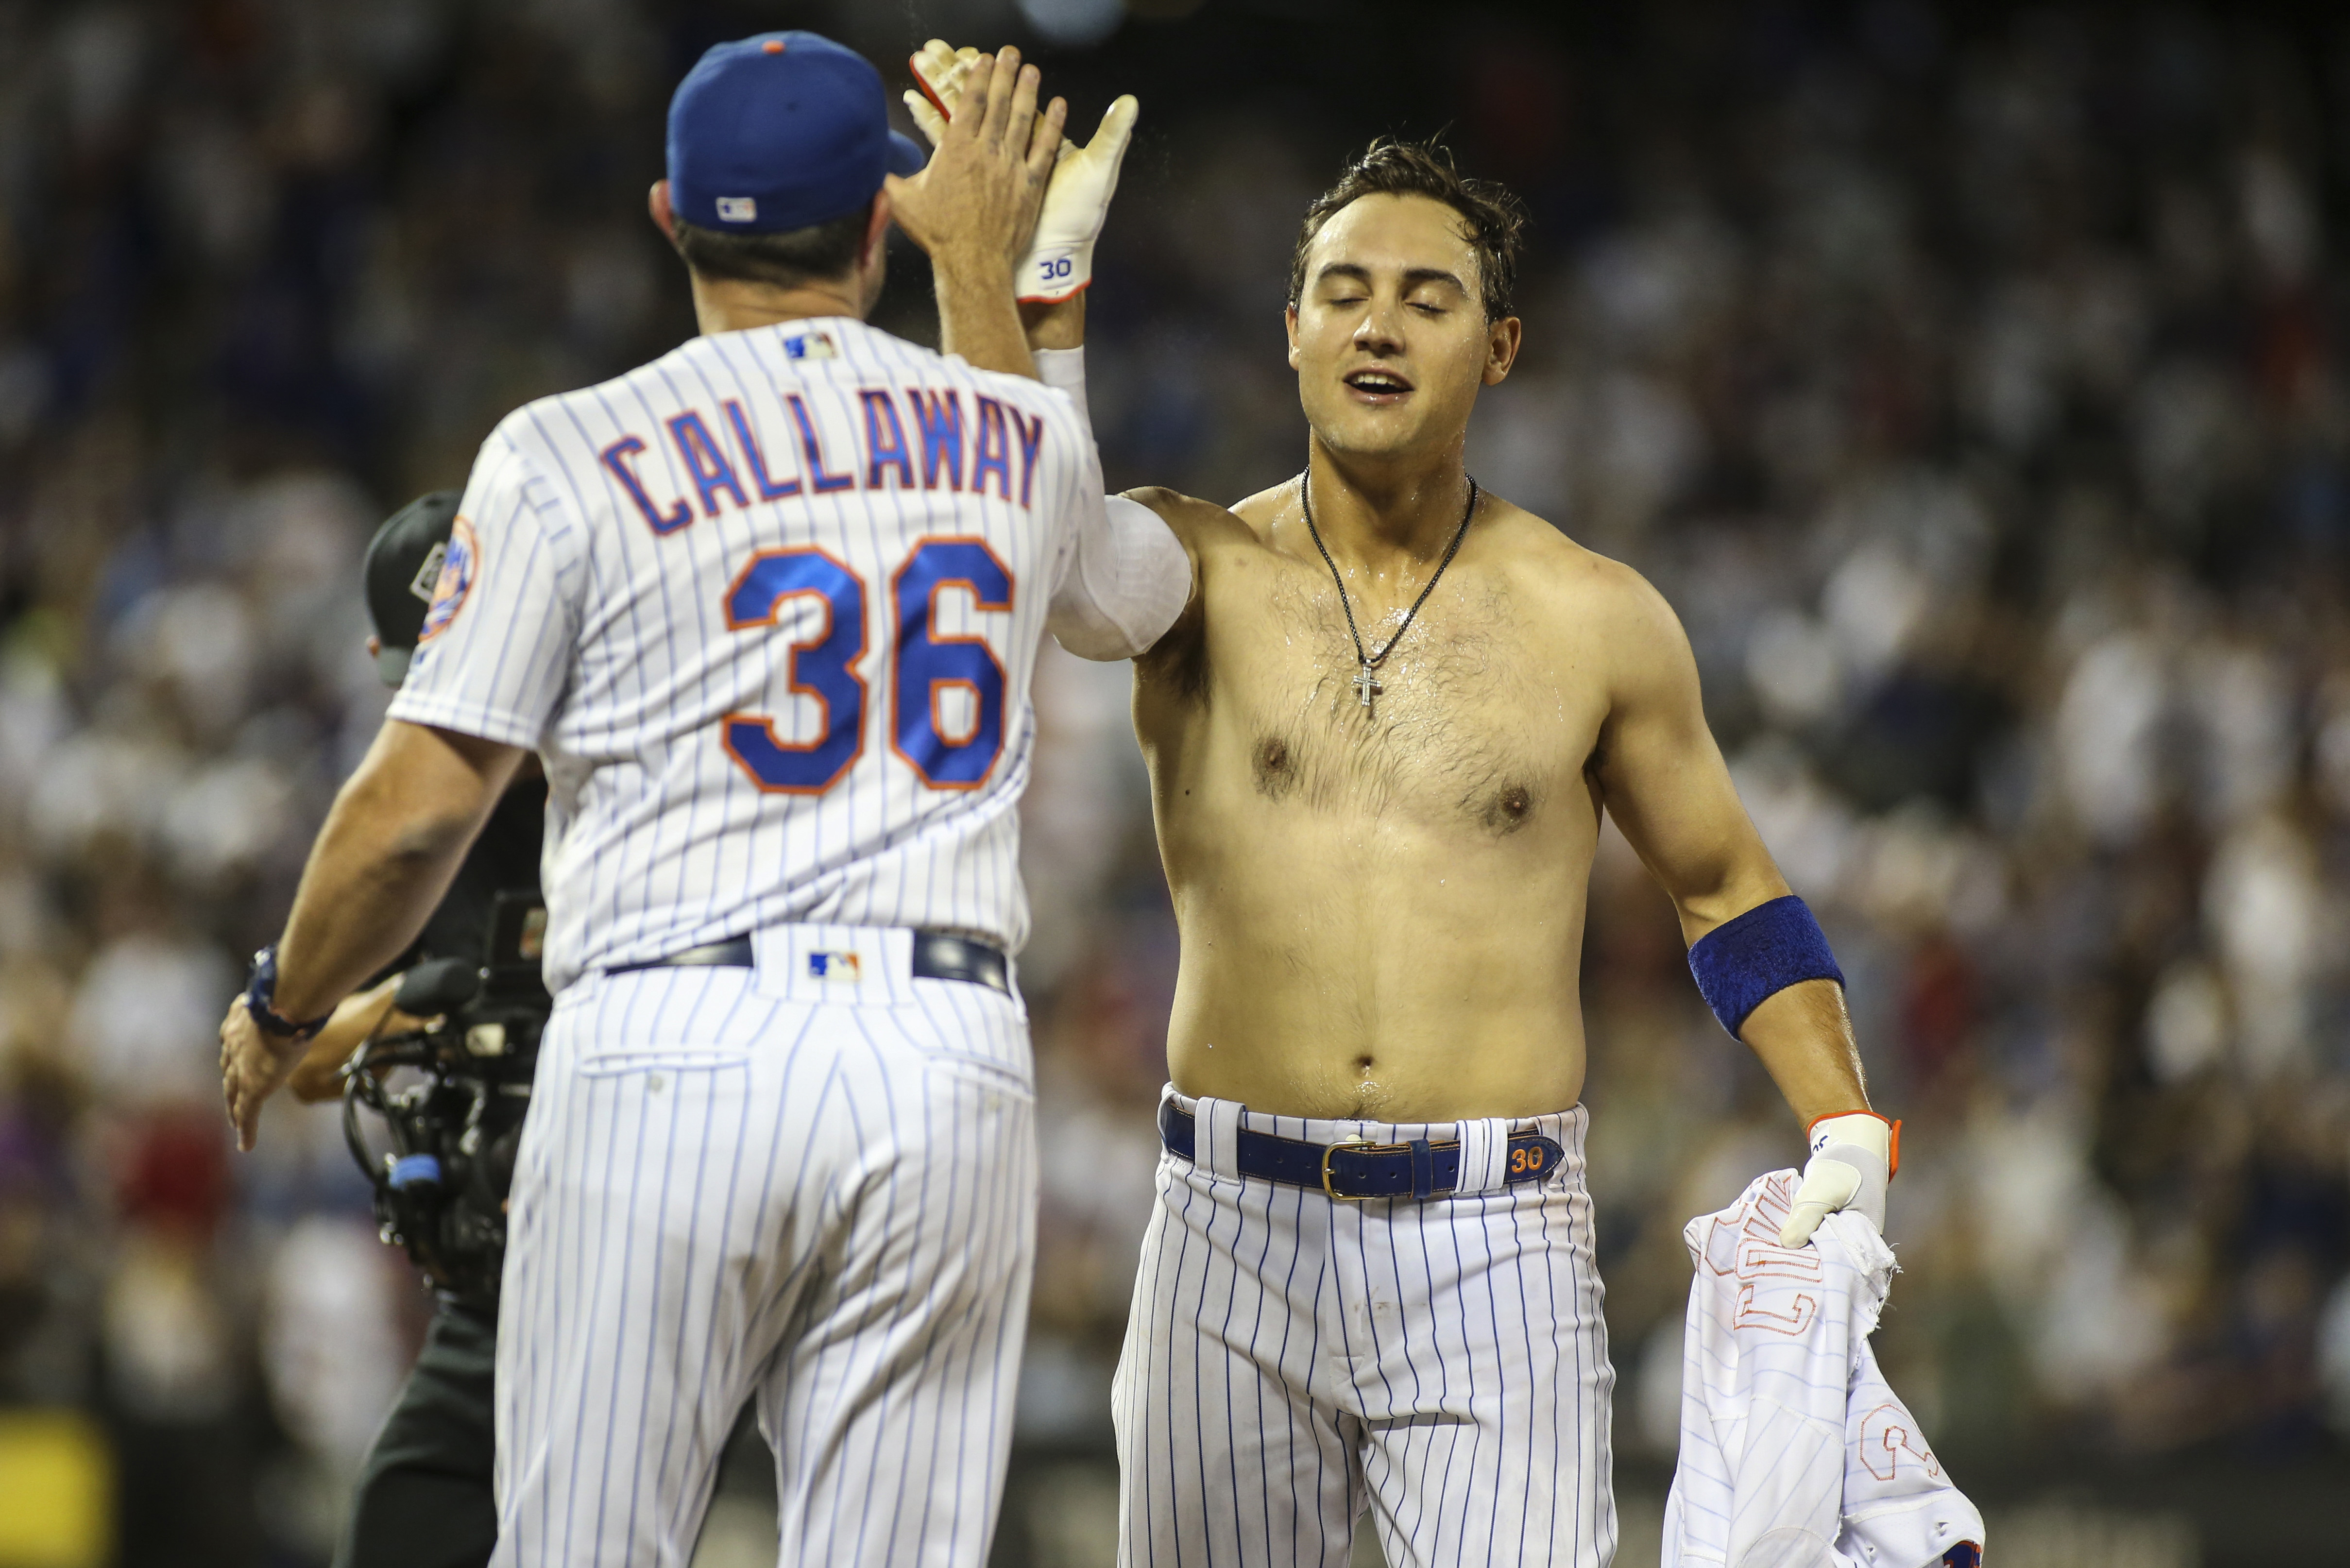 Conforto goes shirtless after Walk off win. 